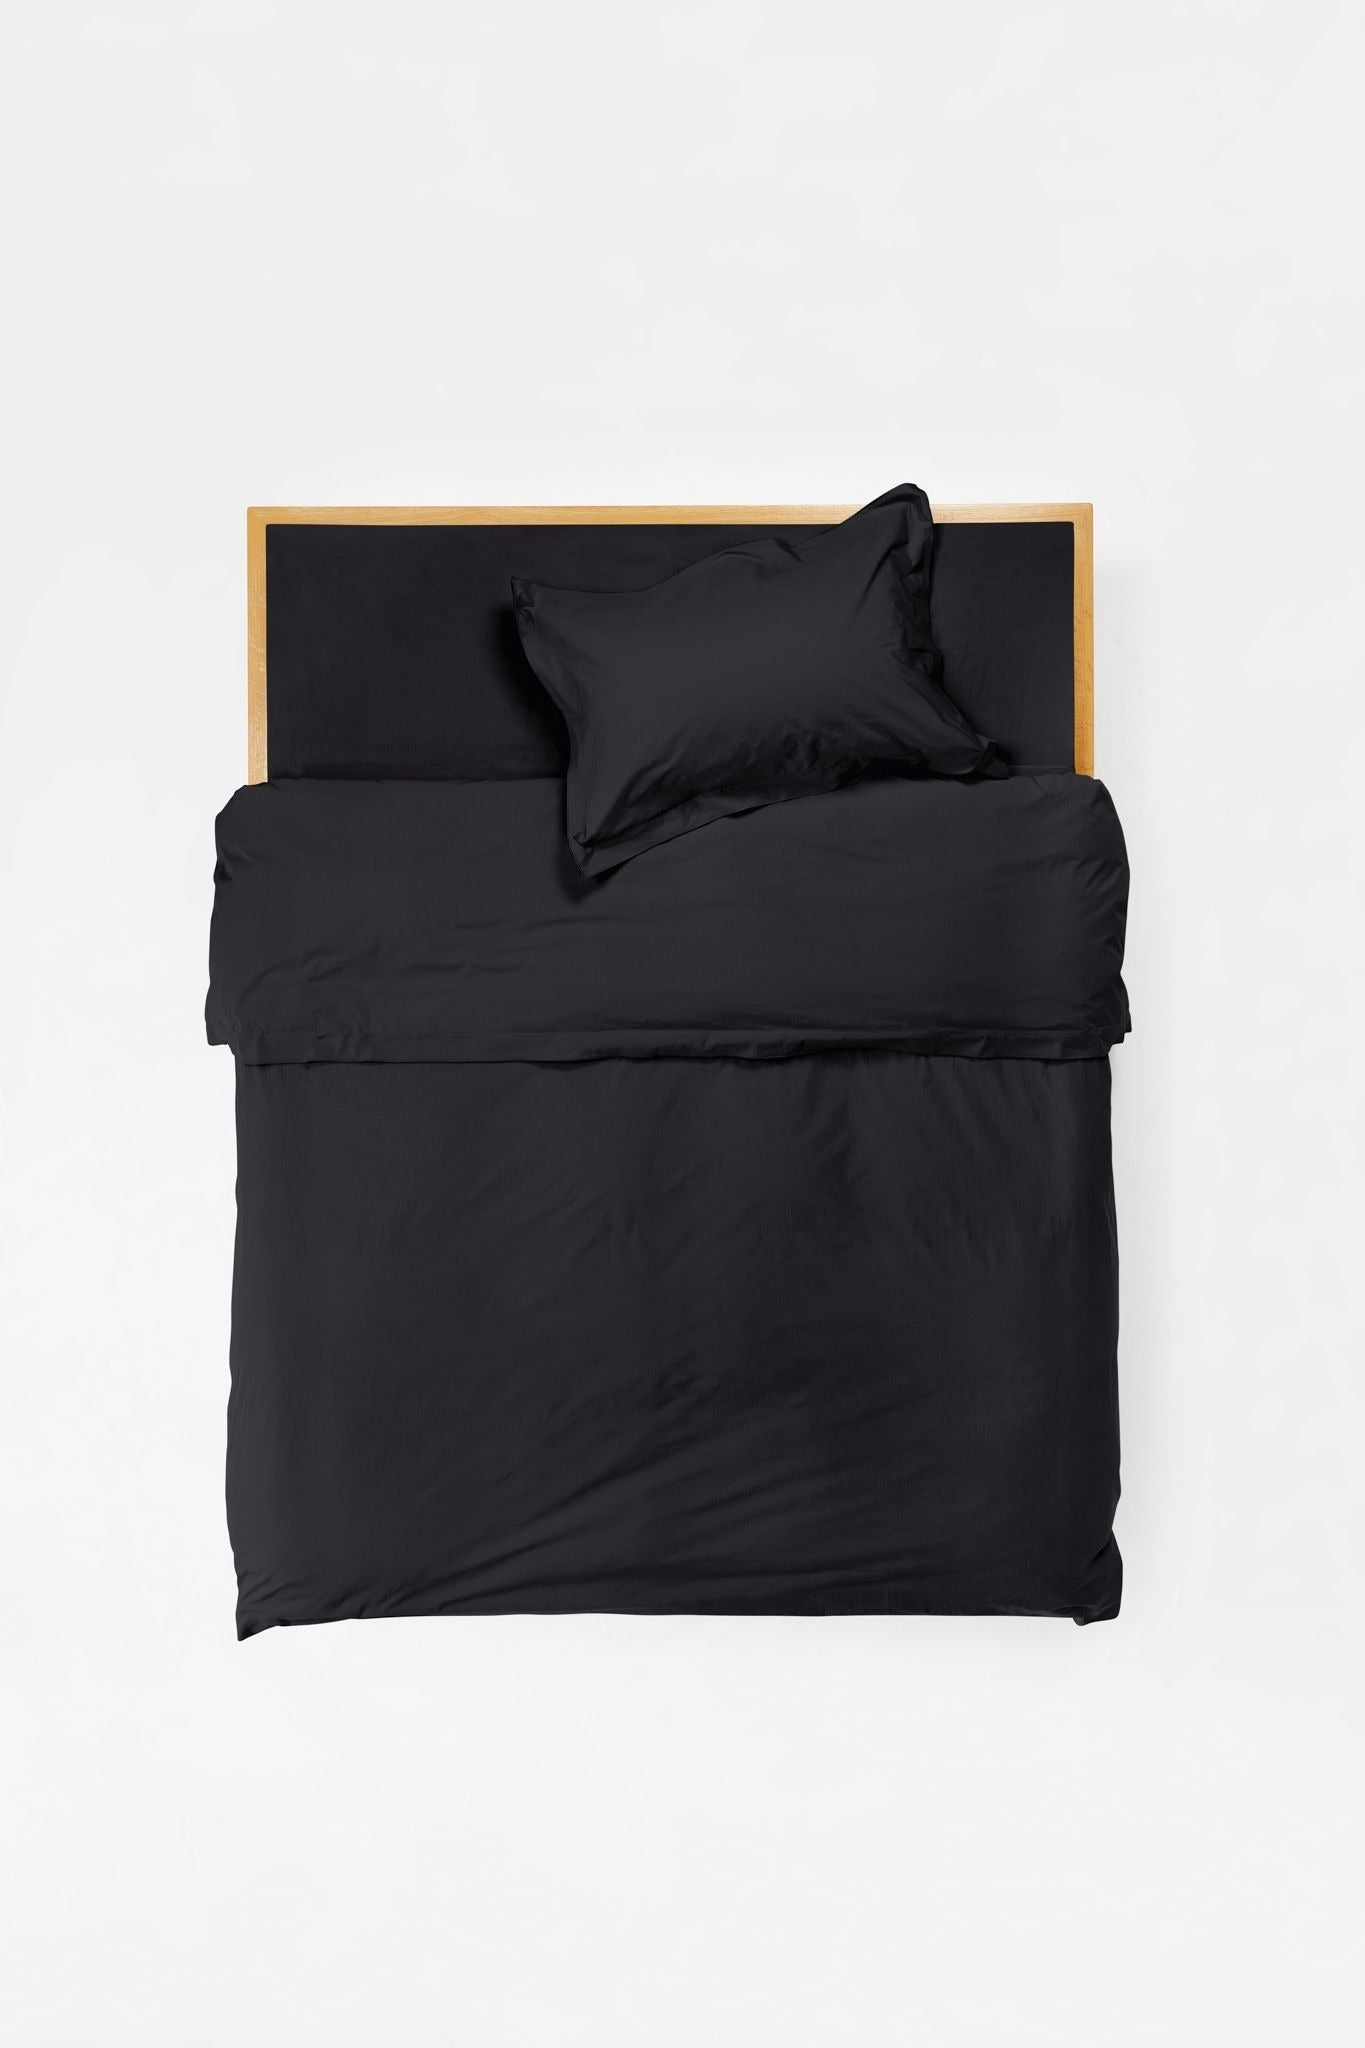 Mono Organic Cotton Percale Duvet Cover - Cinder Duvet Covers in Super King